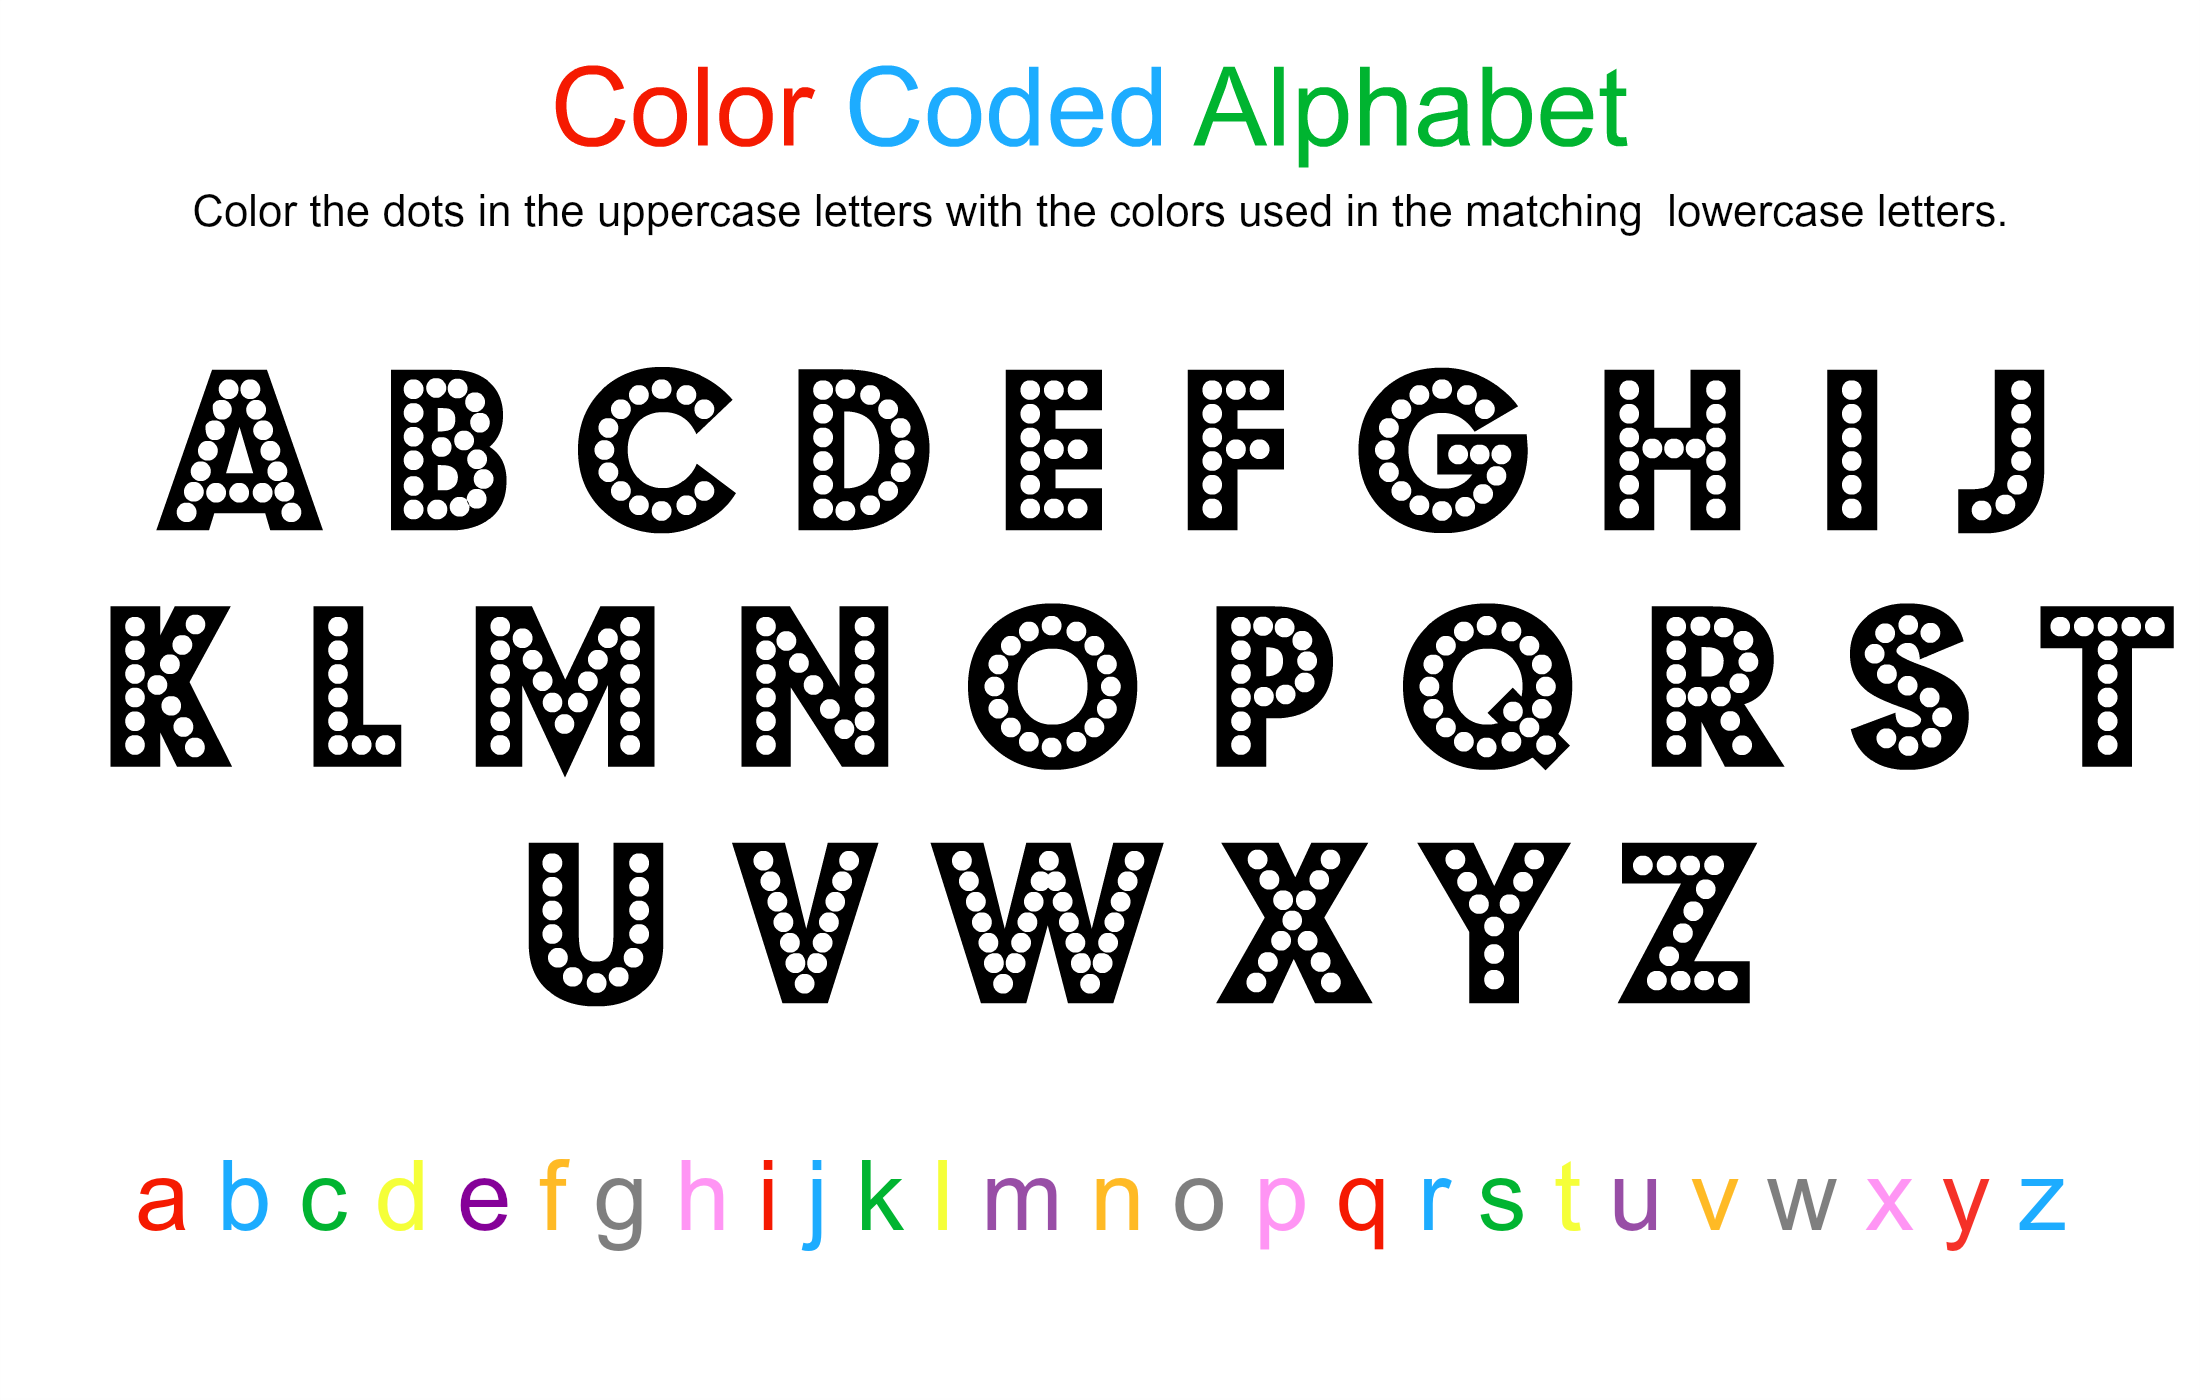 Alphabet Coloring Sheet Free Printable No Time For Flash Cards Alphabet Coloring Page